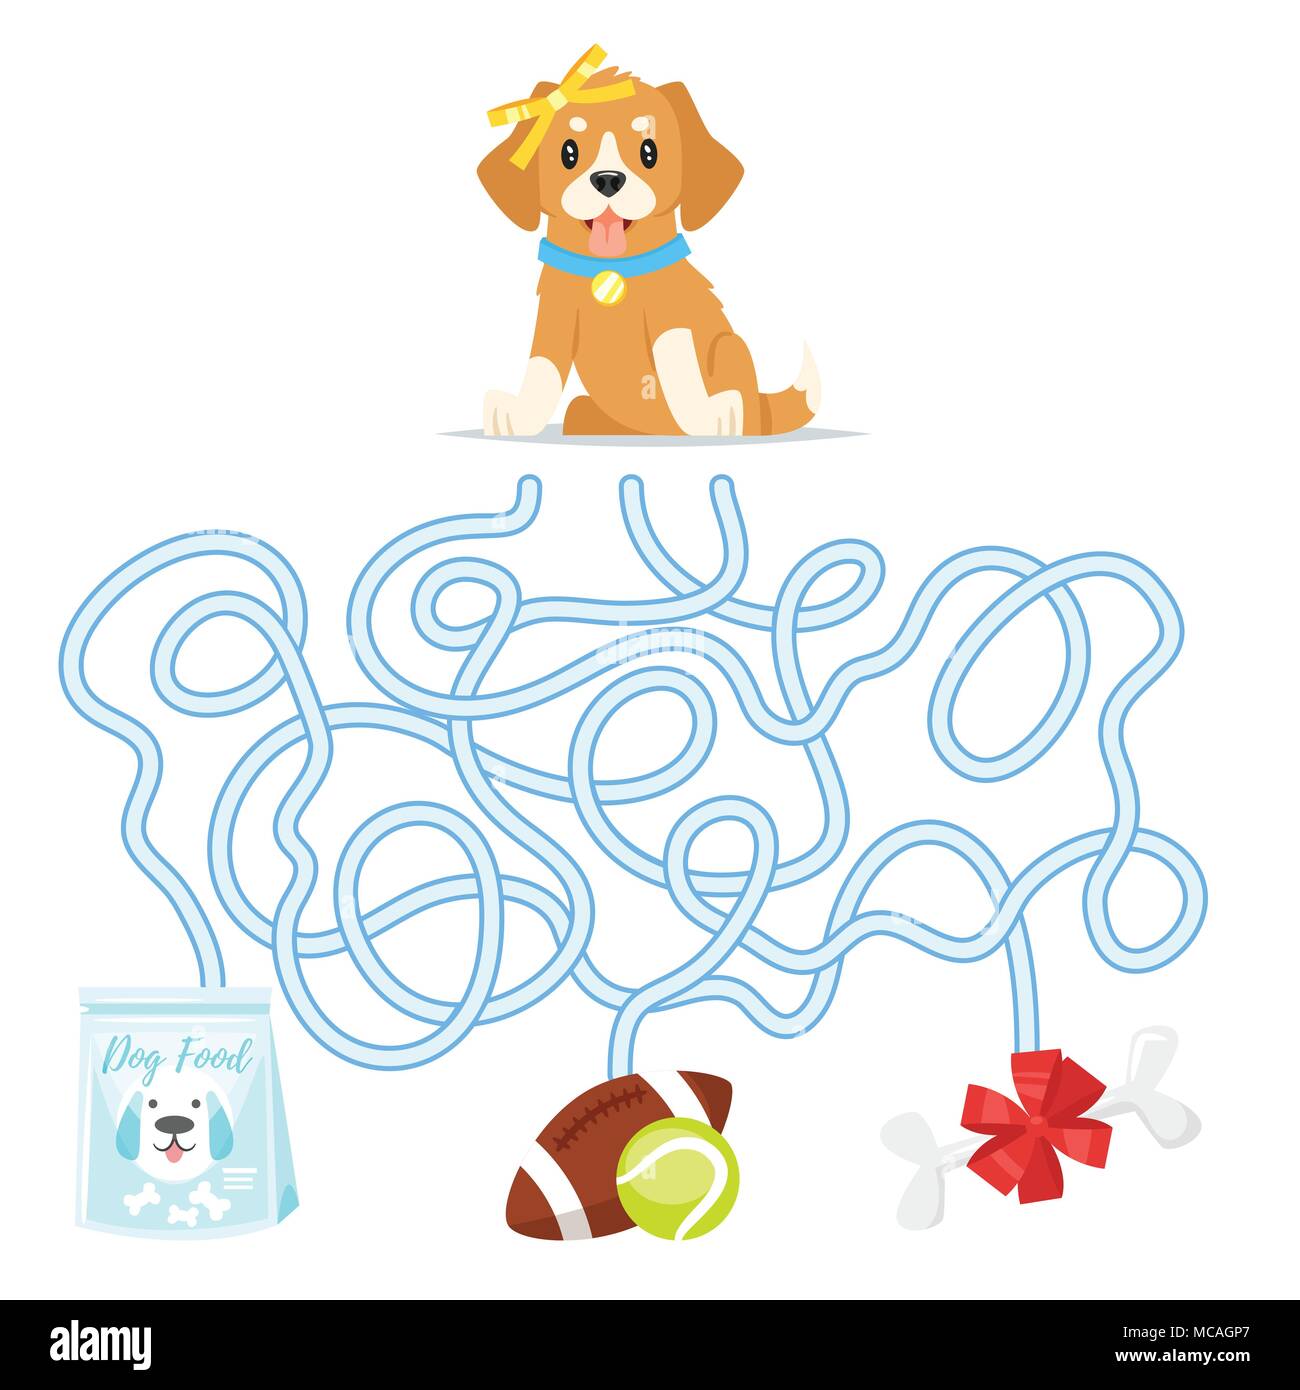 Vector cartoon style illustration of funny maze or labyrinth for children. Help the puppy dog find food, ball or bone. Stock Vector